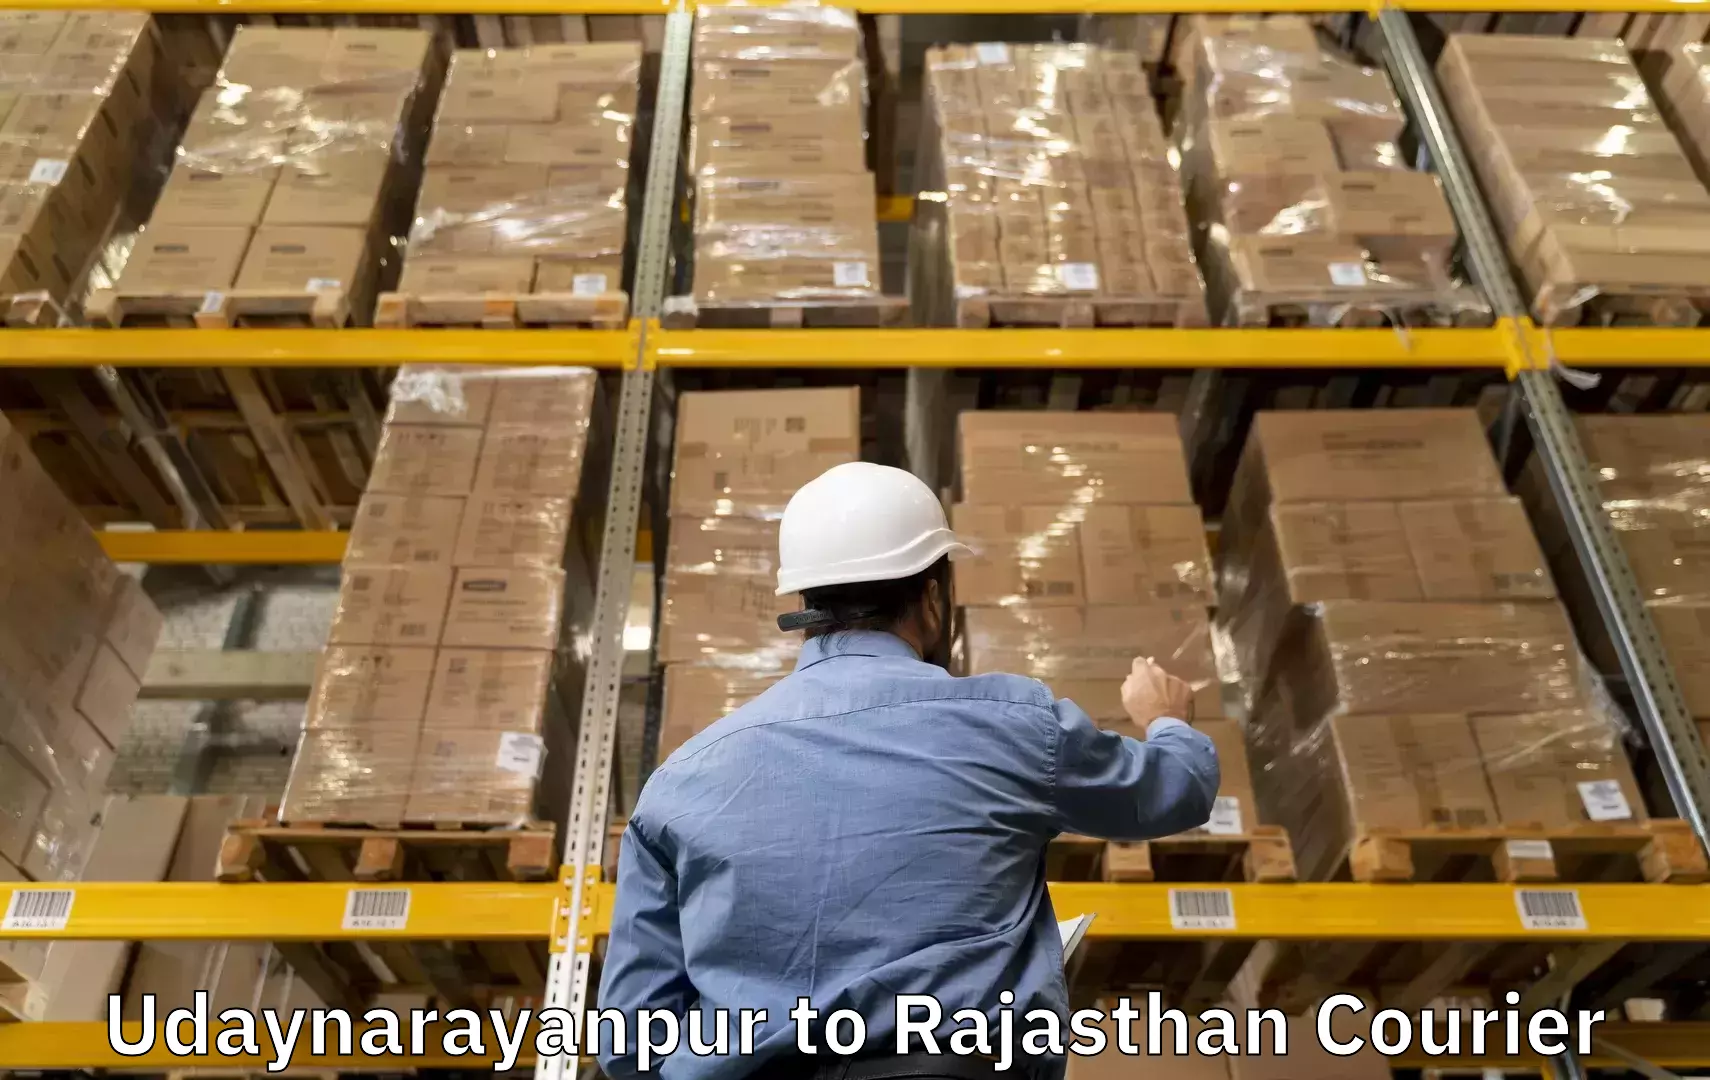 Luggage storage and delivery in Udaynarayanpur to Piparcity